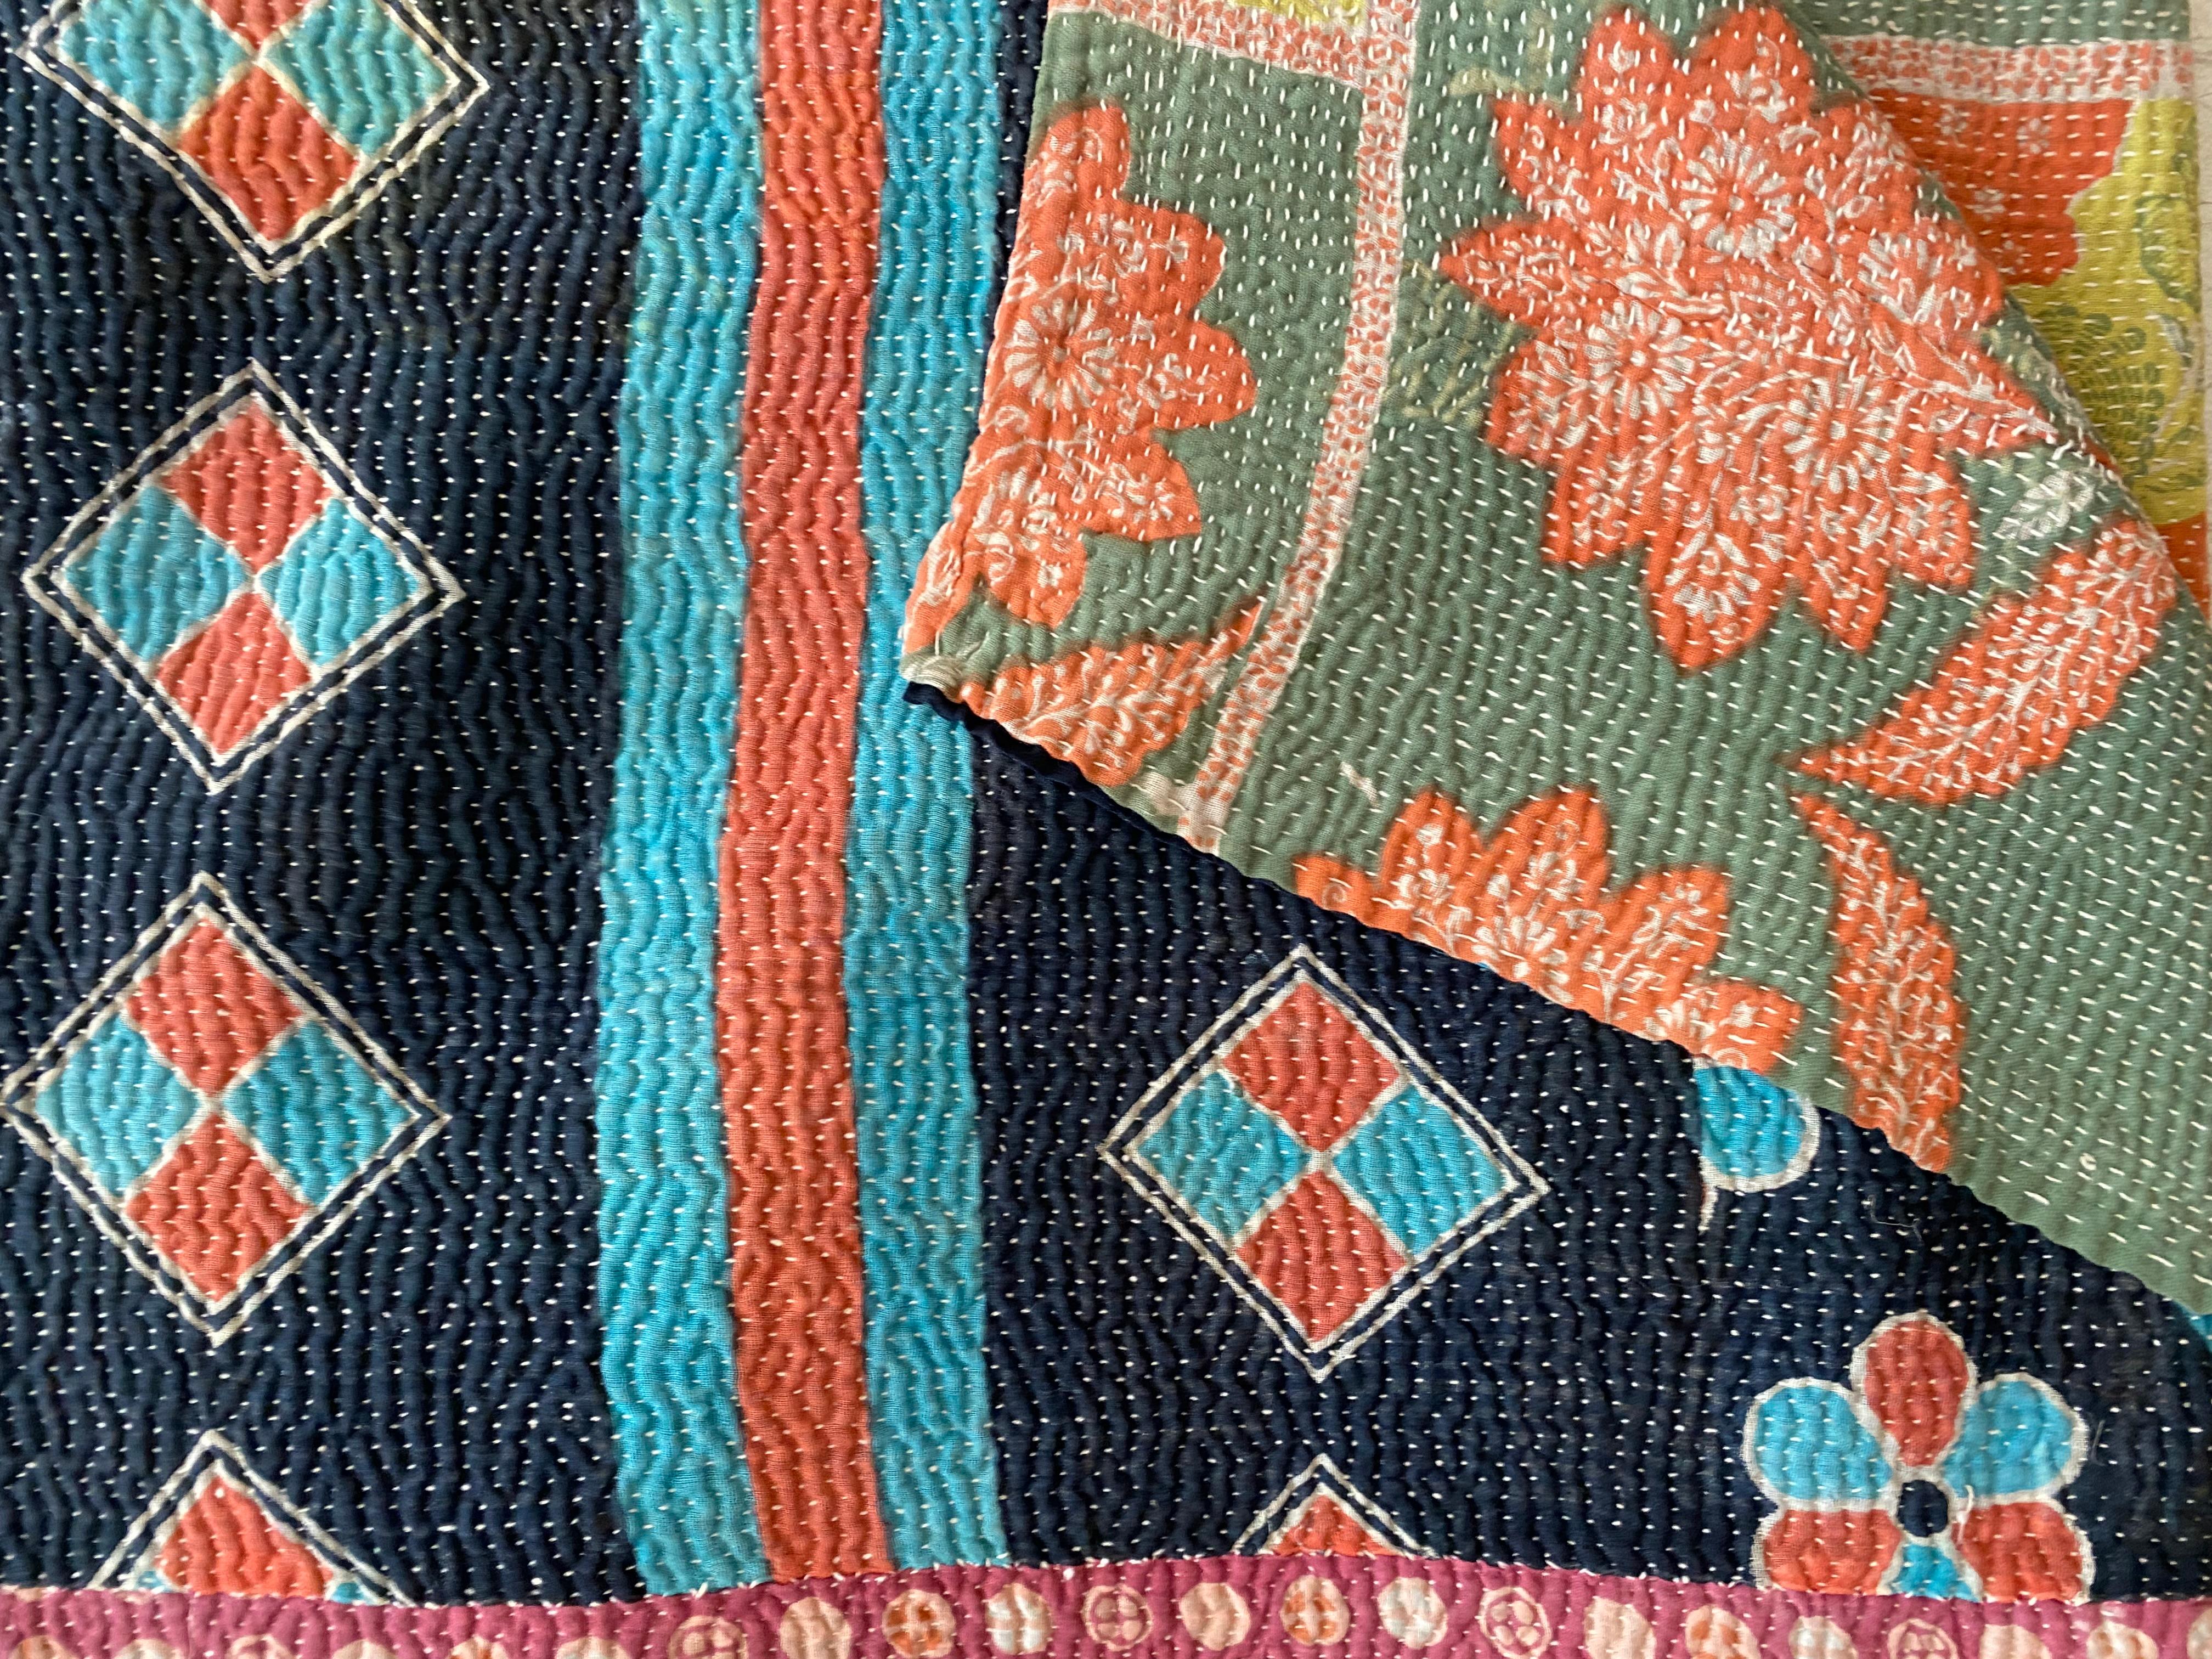 Vintage indian quilt called « kantha »
Traditional technique of block print
Very Nice bed cover or spray
Unique pièce 